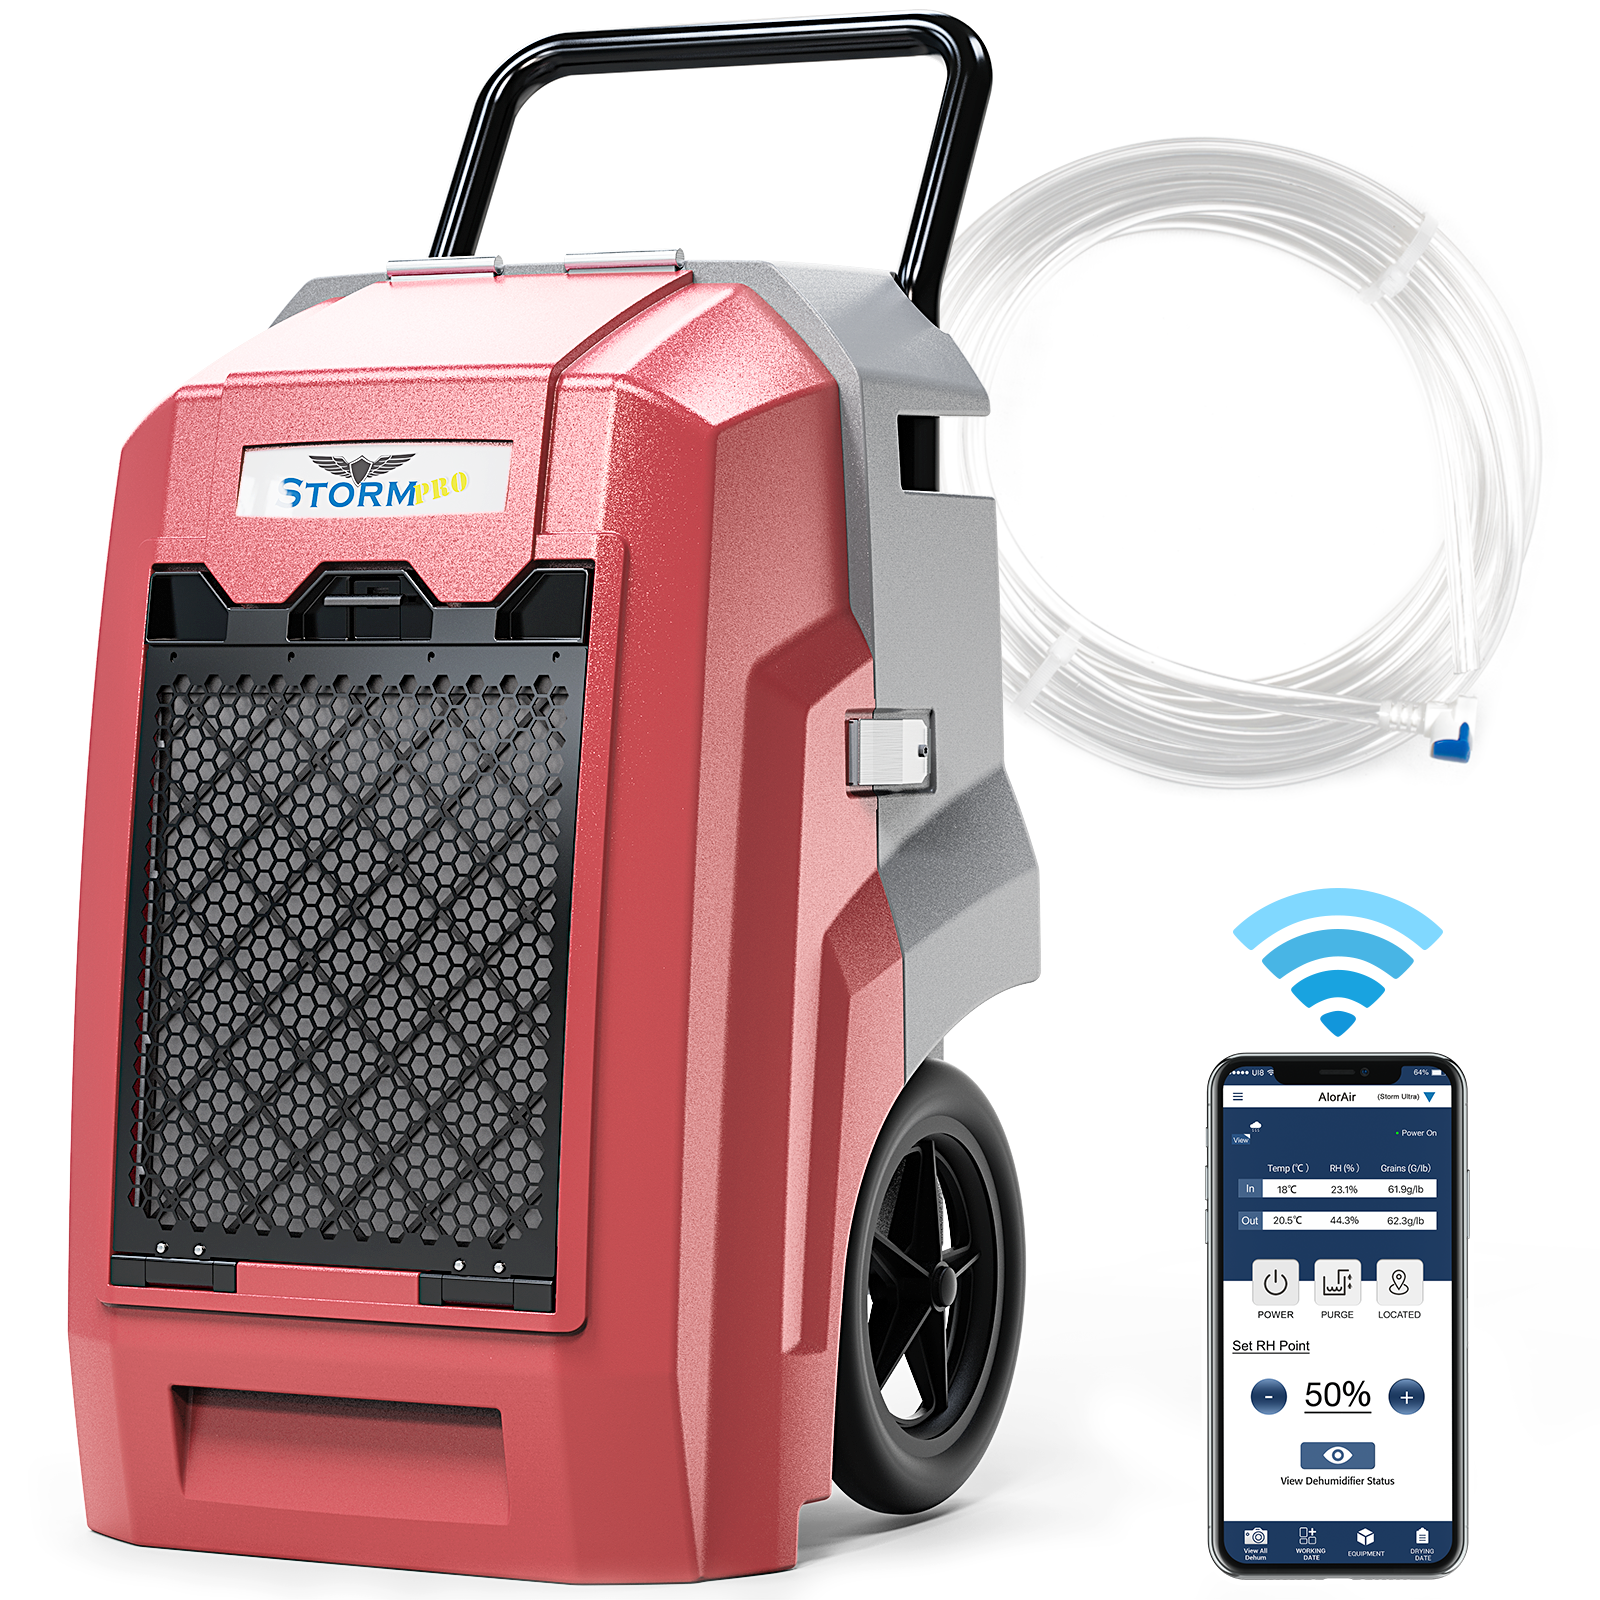 AlorAir Storm Pro Smart WiFi Dehumidifier, 85 PPD Commercial Dehumidifier with Pump, cETL listed, LCD Display, Auto Shut Off, 5 Years Warranty, Industrial dehumidifier for Disaster Restoration